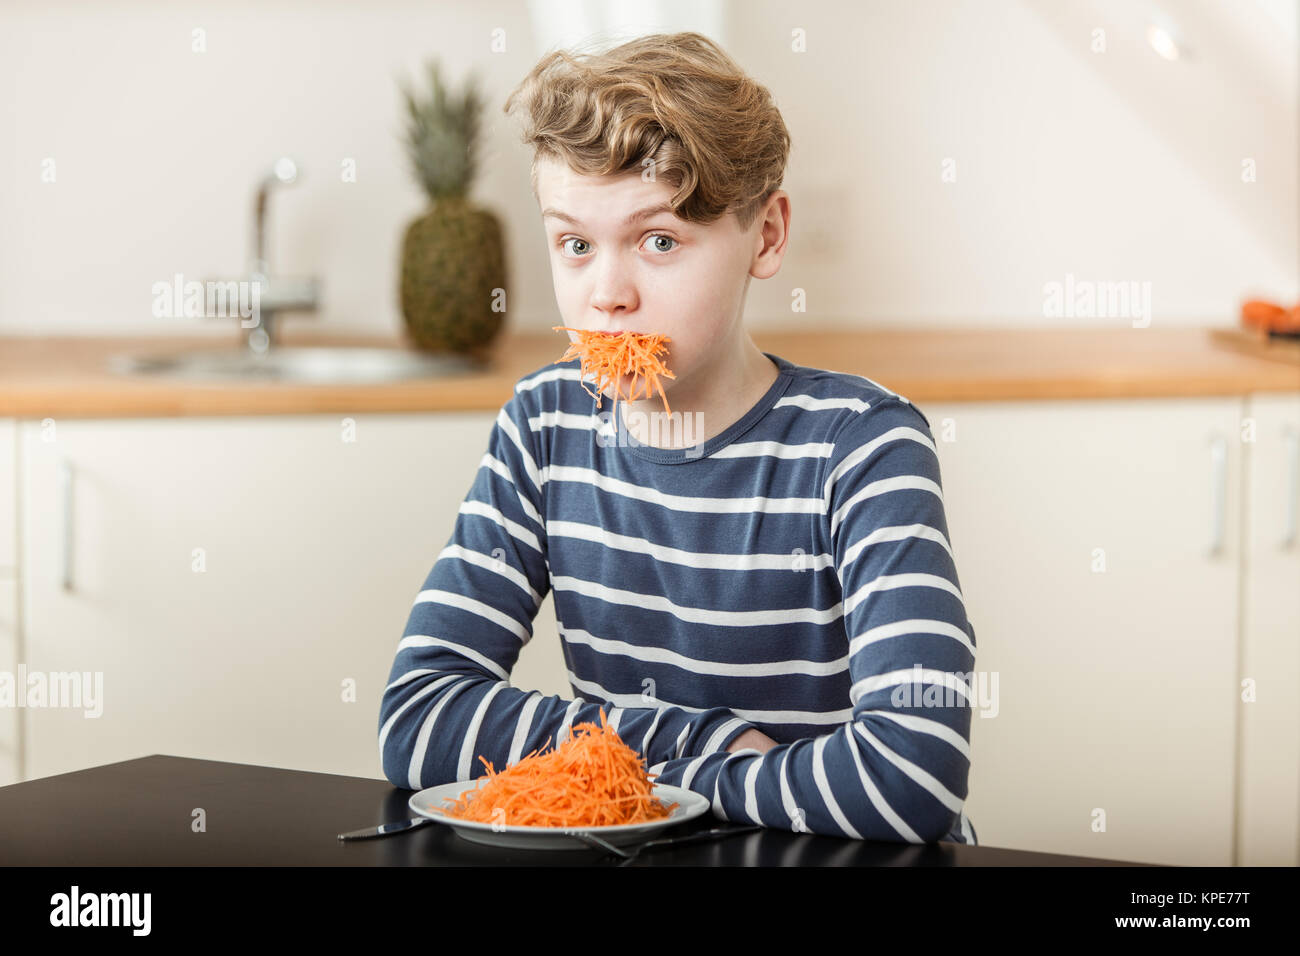 Boy at Table with Mouthful of Shredded Carrots Stock Photo - Alamy